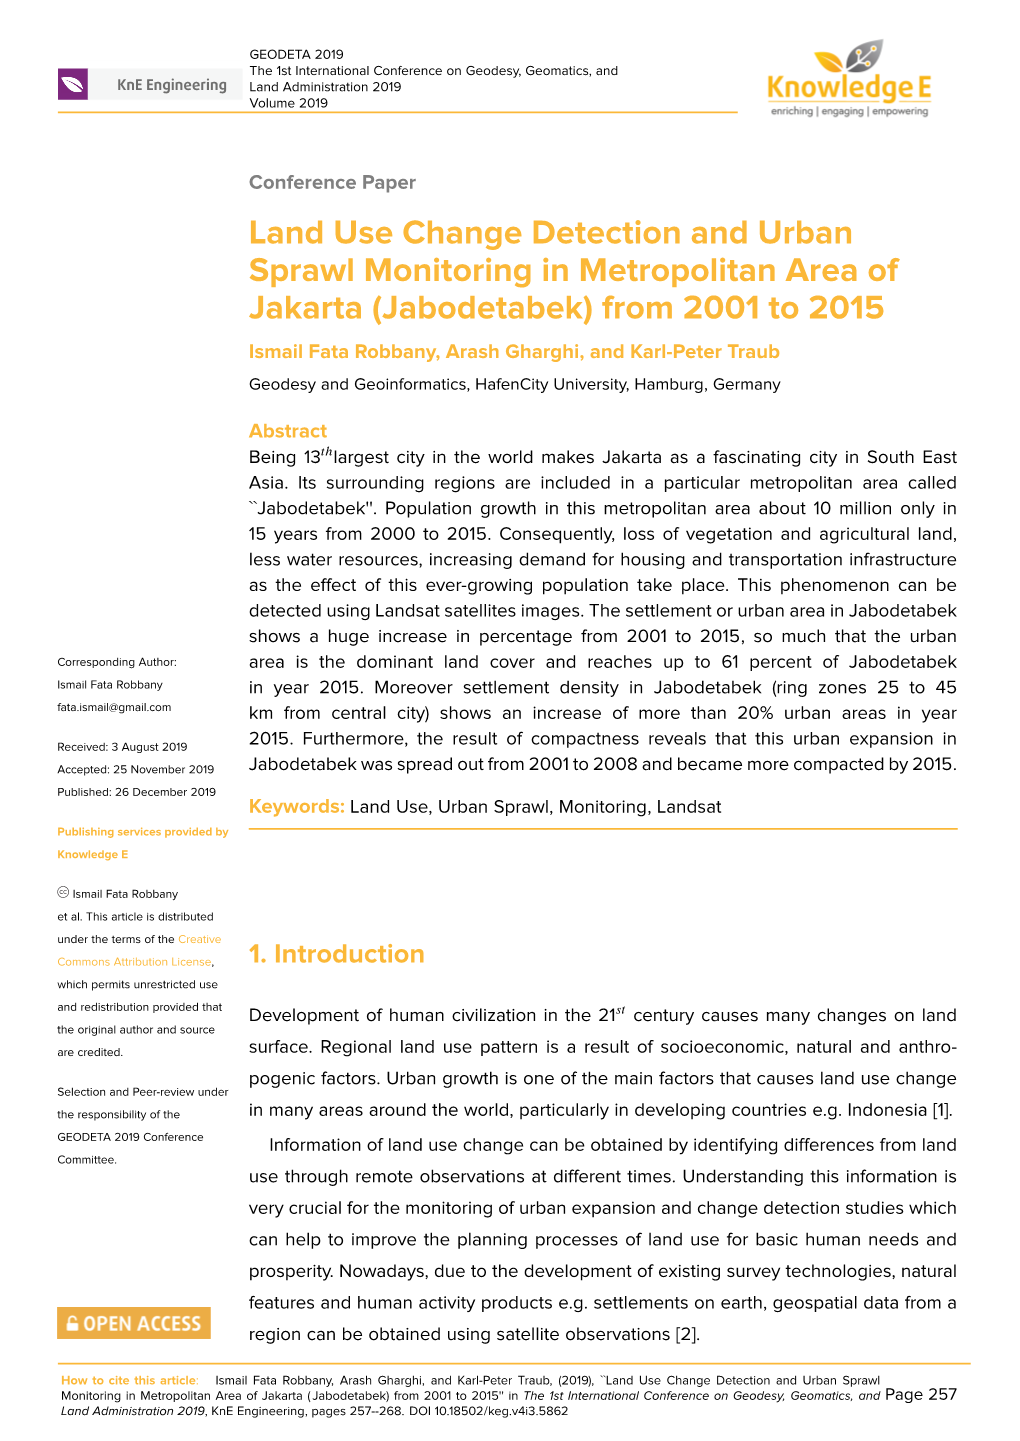 Land Use Change Detection and Urban Sprawl Monitoring In